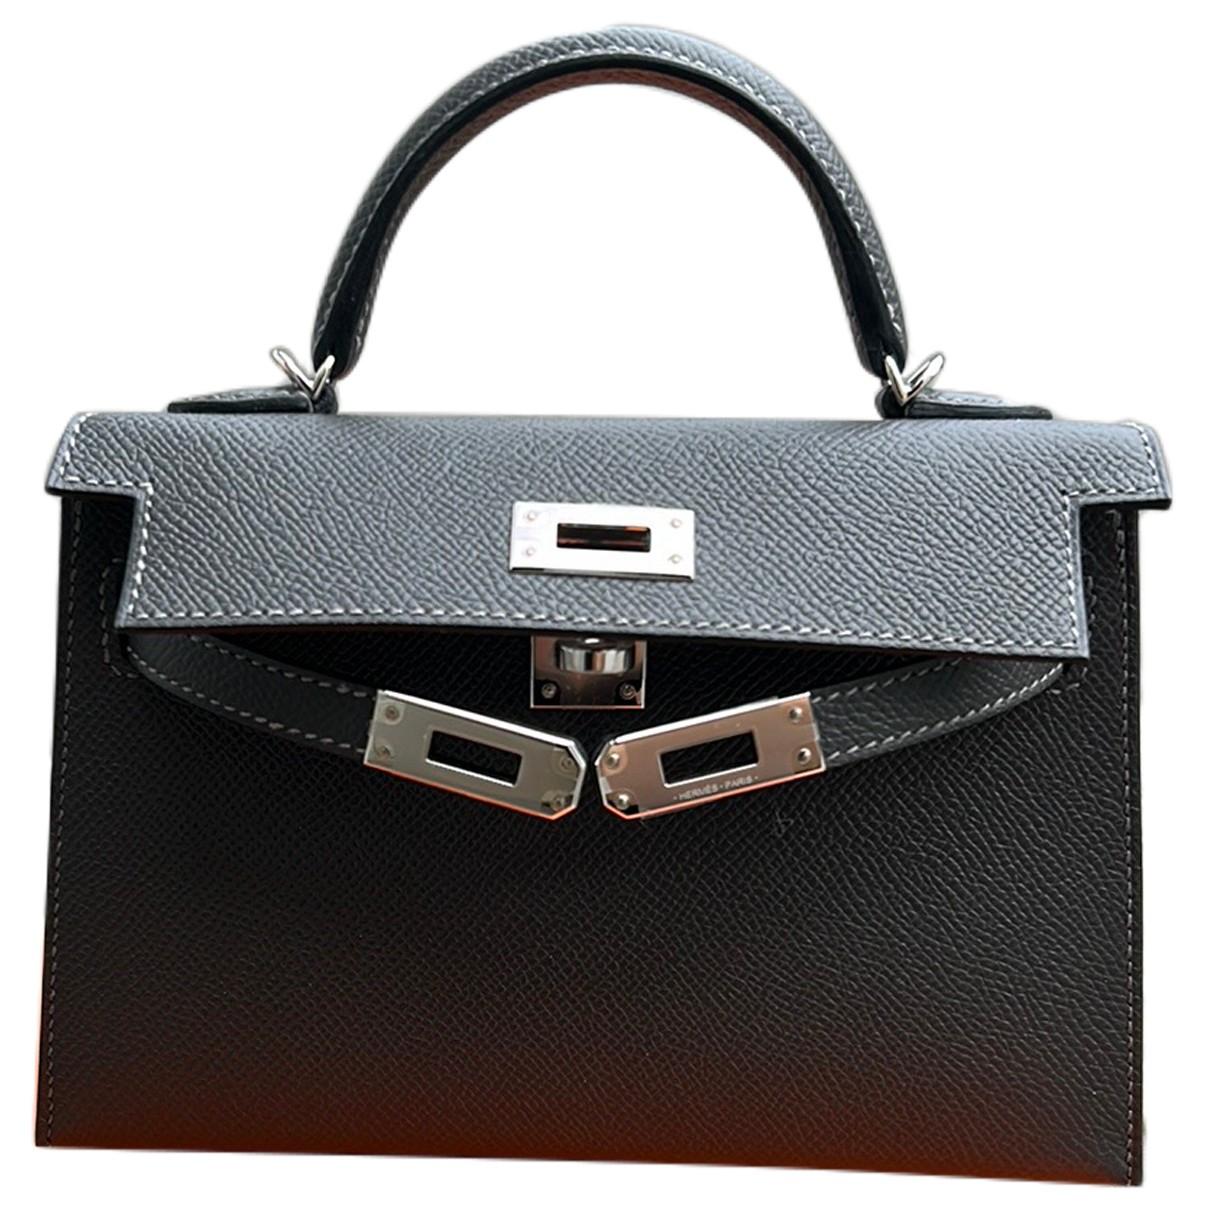 Hermès Bag for women  Buy or Sell your Luxury Bags online! - Vestiaire  Collective